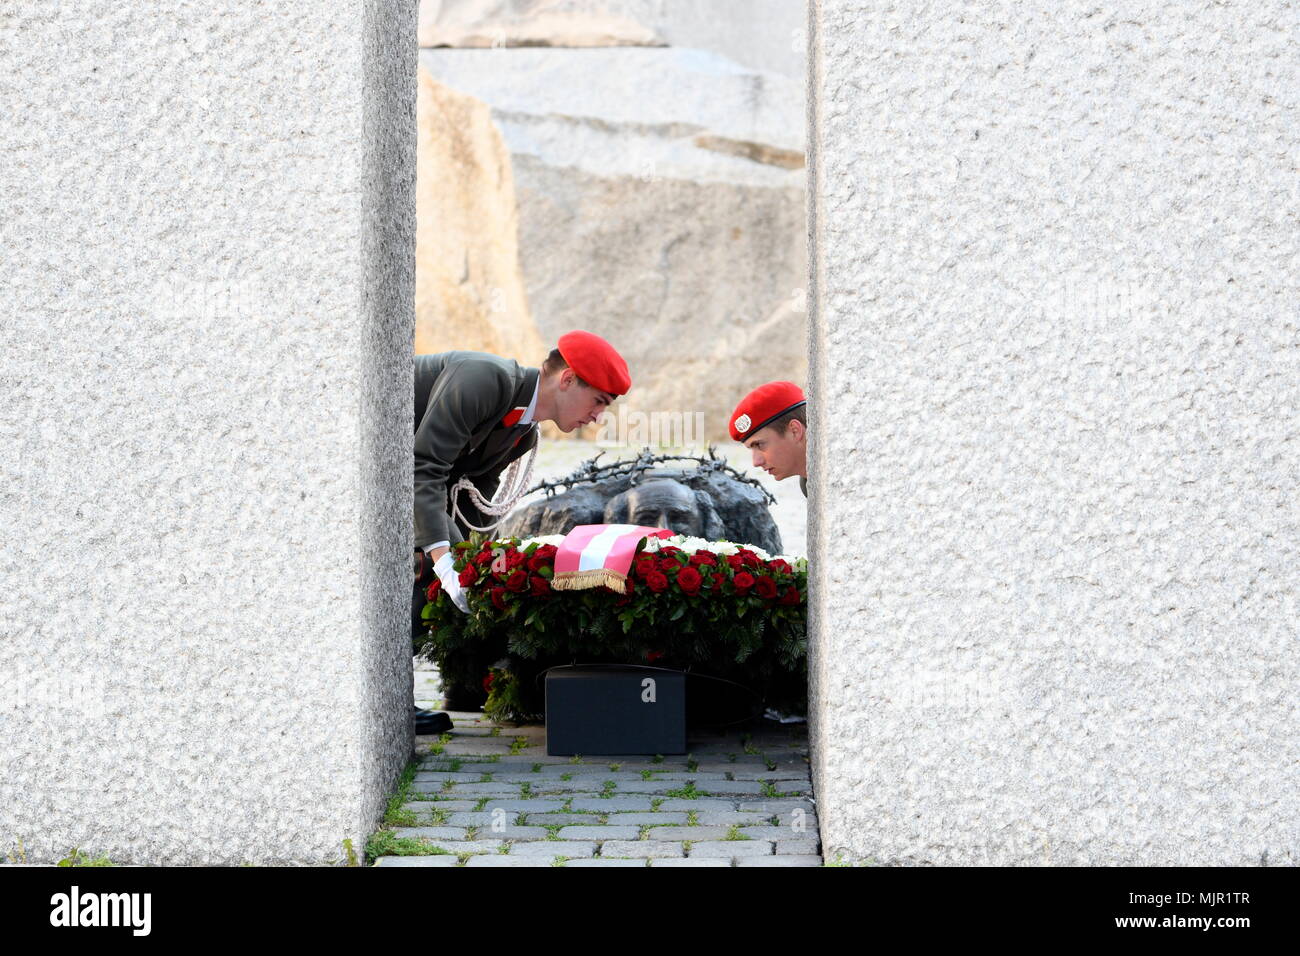 Vienna, Austria. 06. May 2018. To commemorate the victims of National Socialism  in front of the memoriel against war and fascism.  Pictures show Guard soldiers of the Austrian Armed Forces set down a wreath in front of the monument against war and fascism.   Credit: Franz Perc / Alamy Live News Credit: Franz Perc/Alamy Live News Stock Photo